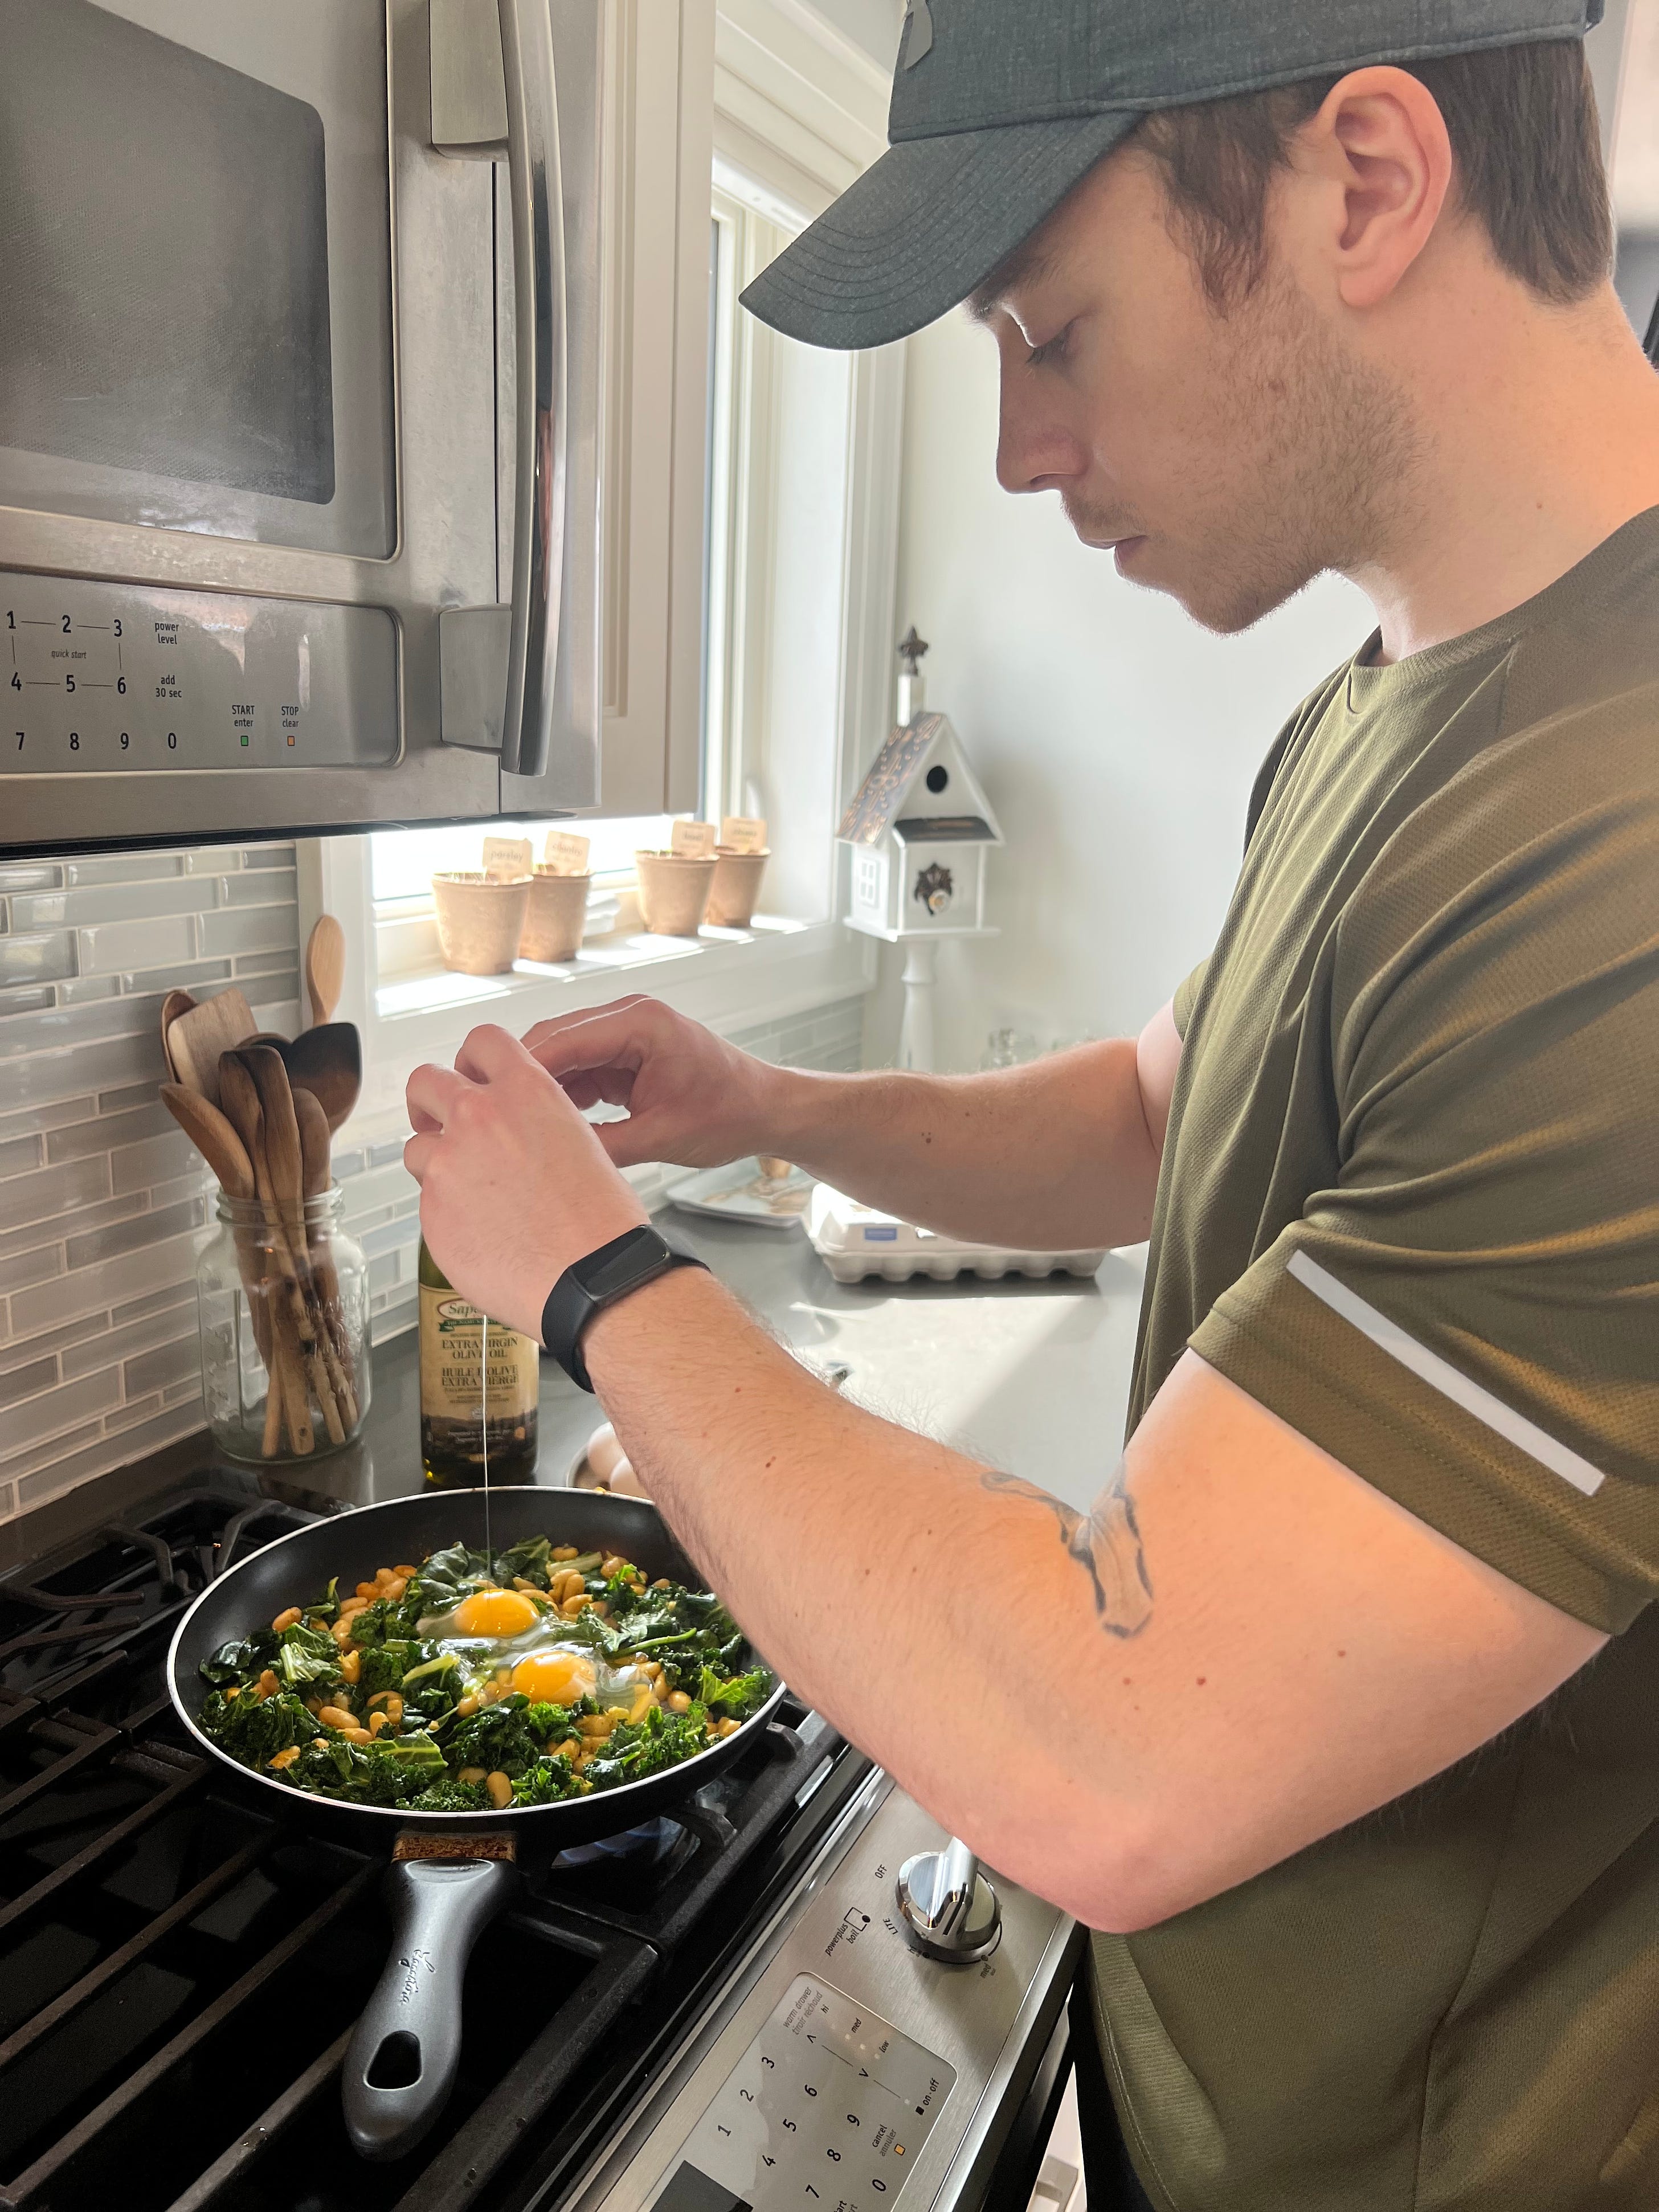 Cooking my slow carb diet lunch (white kidney beans, eggs, tuna, spinach, kale, swiss chard, olive oil, and a variety of spices). March 22, 2022.